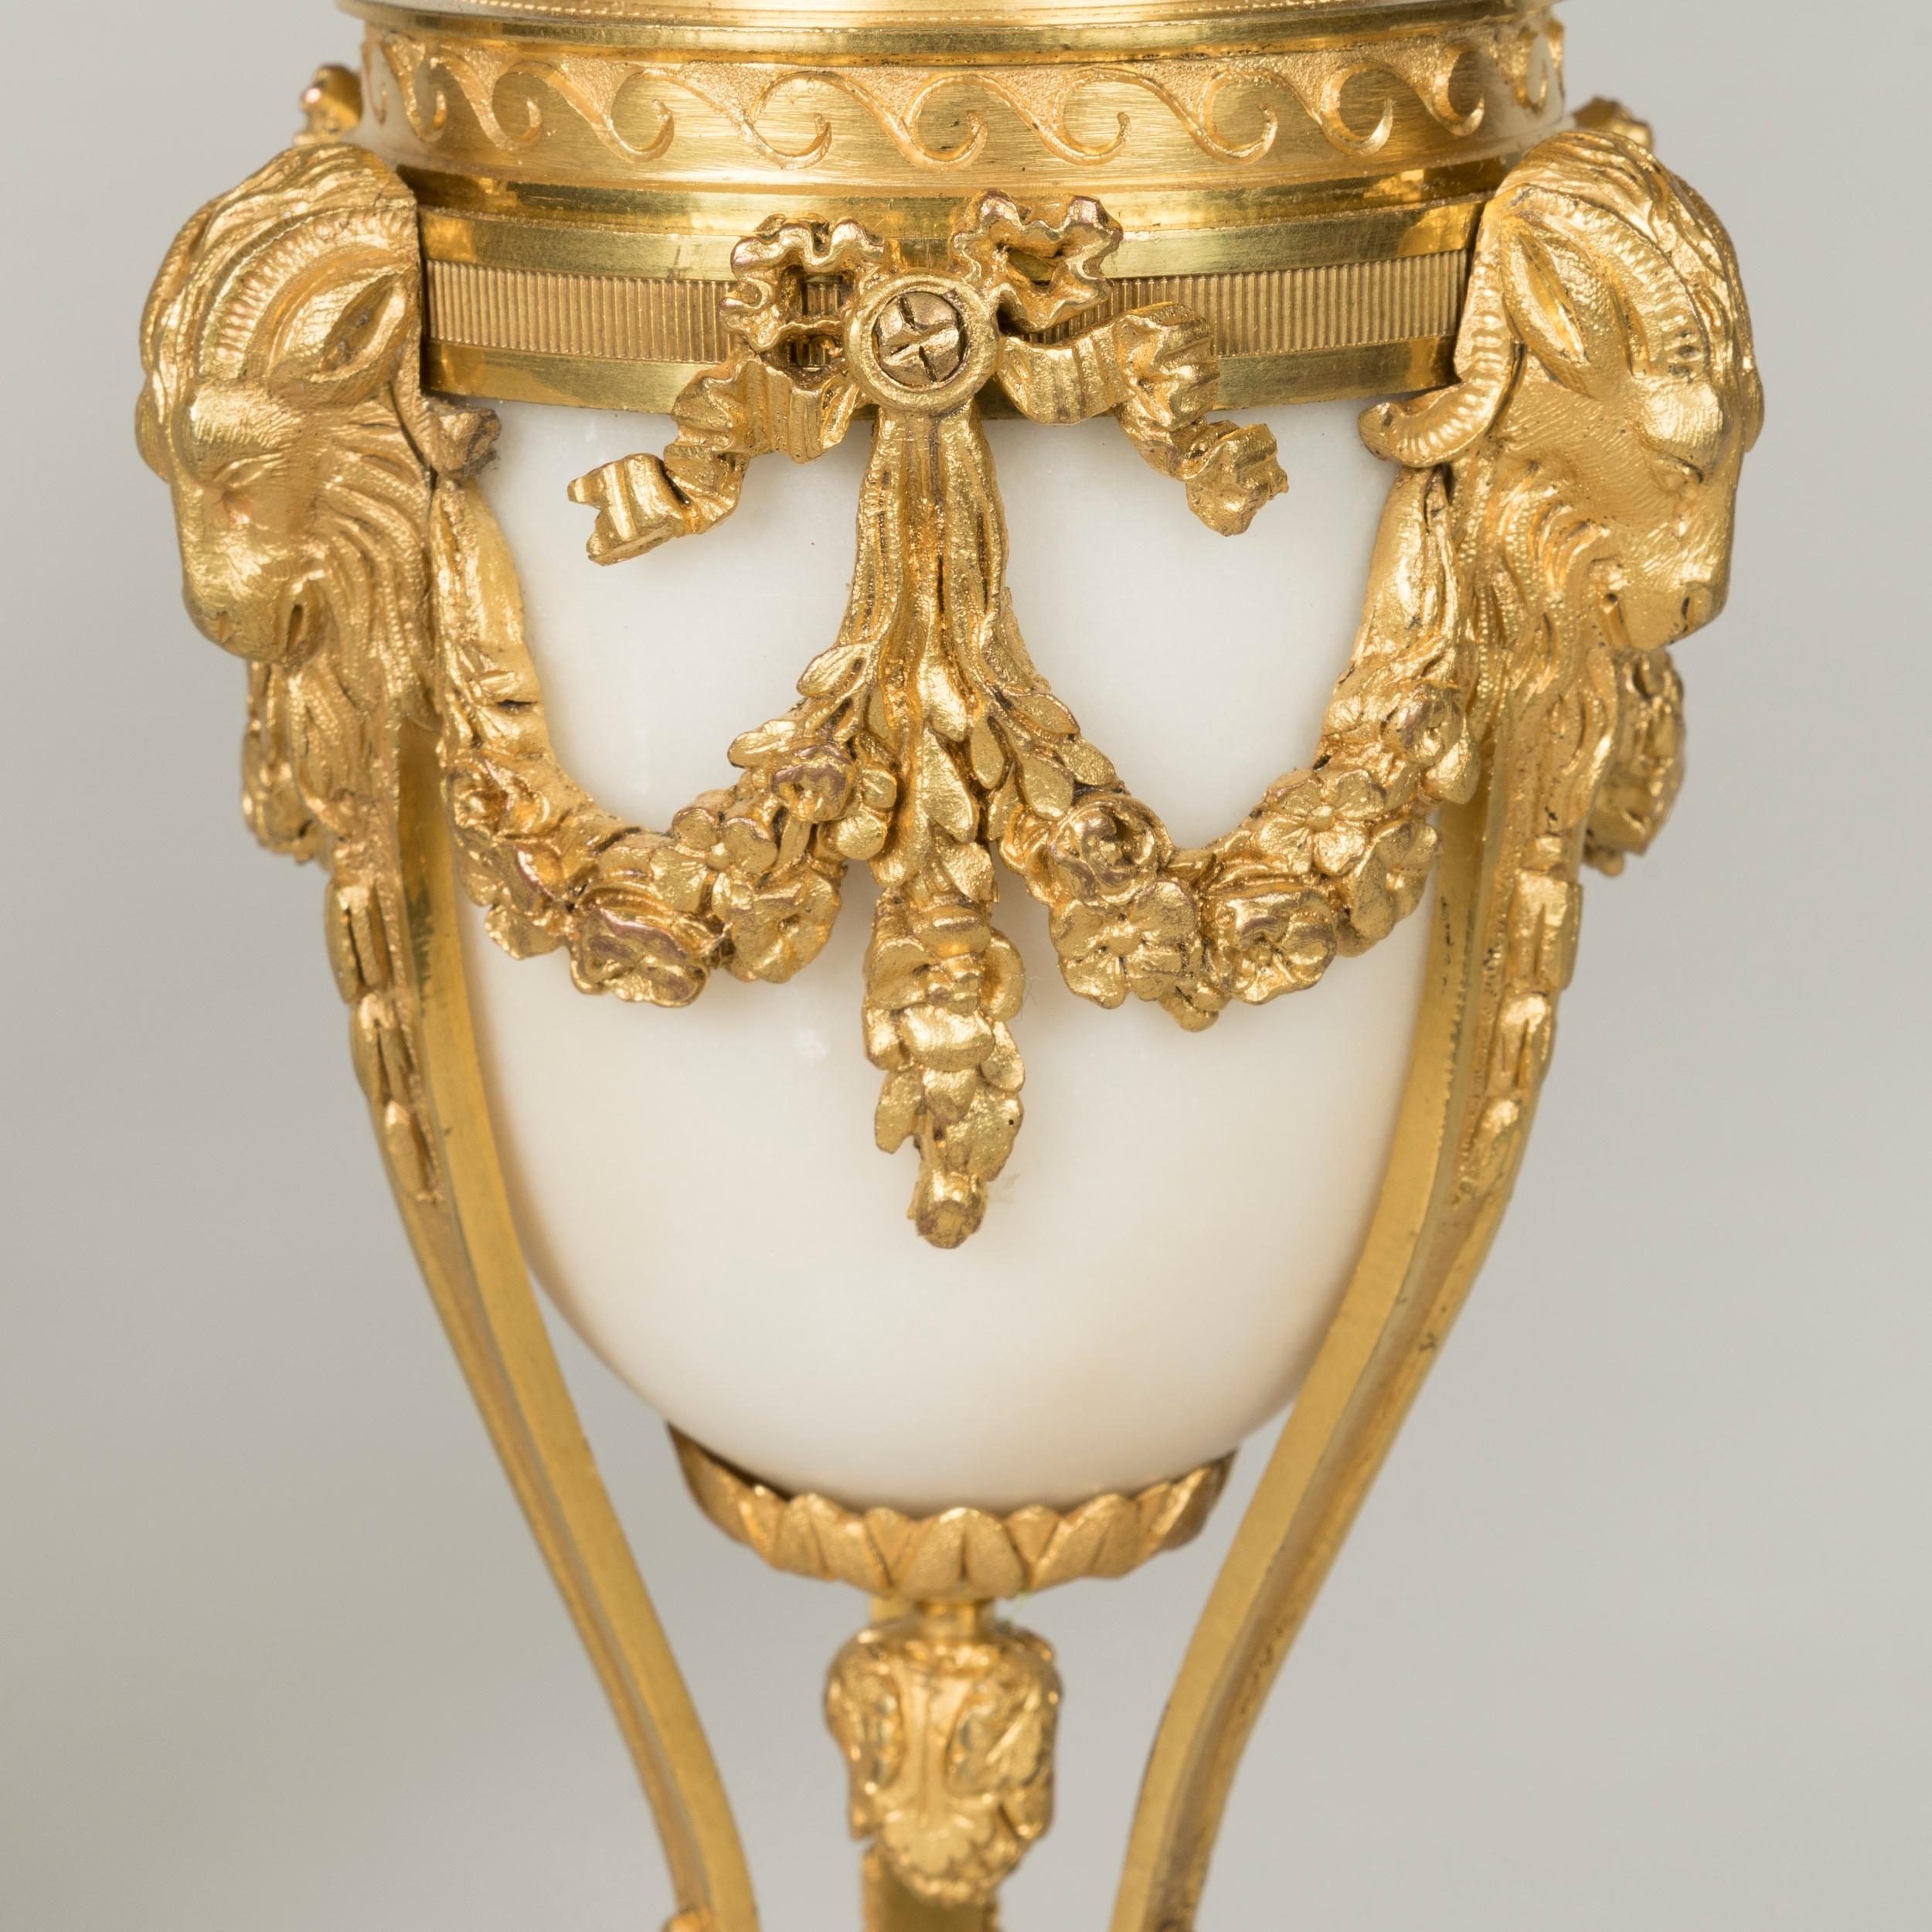 French 19th Century Marble and Ormolu Lyre Clock in the Louis XVI Style For Sale